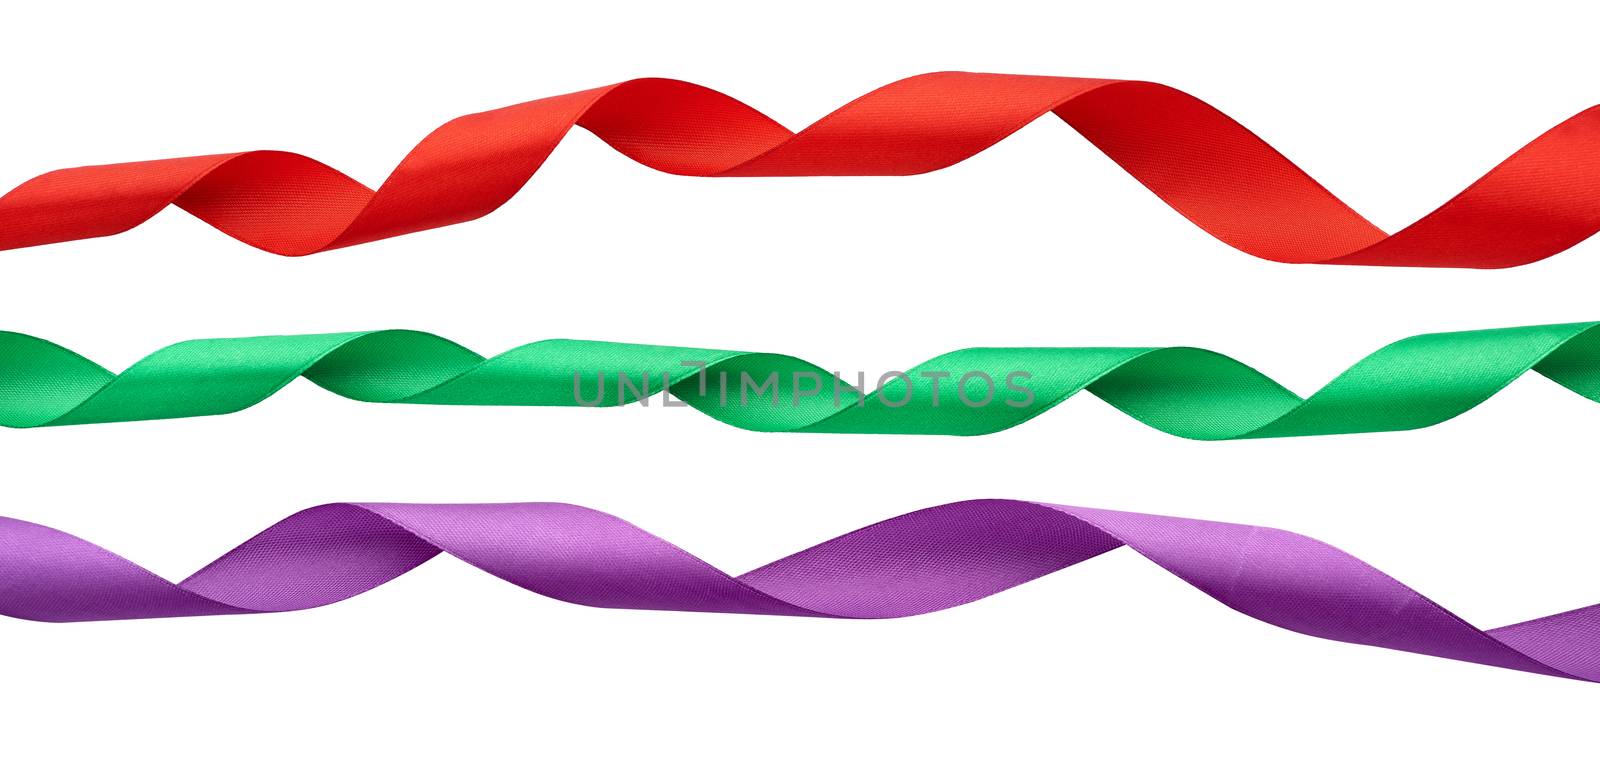 set of twisted silk red, green, purple ribbons isolated on white background, decorative element for designer